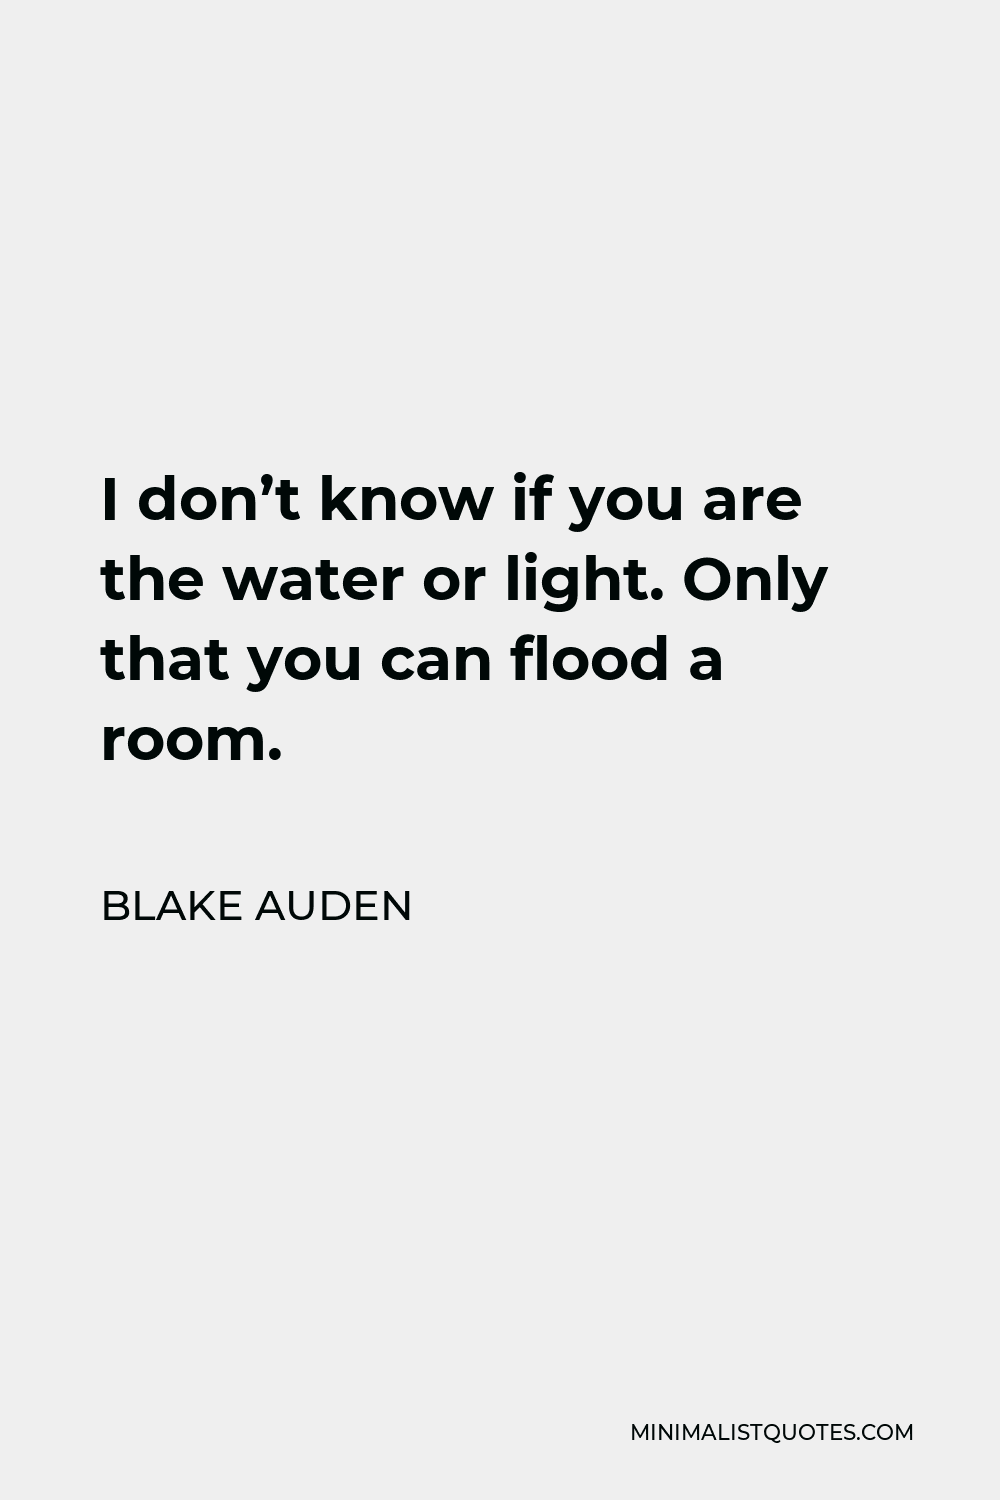 Blake Auden Quote - I don’t know if you are the water or light. Only that you can flood a room.